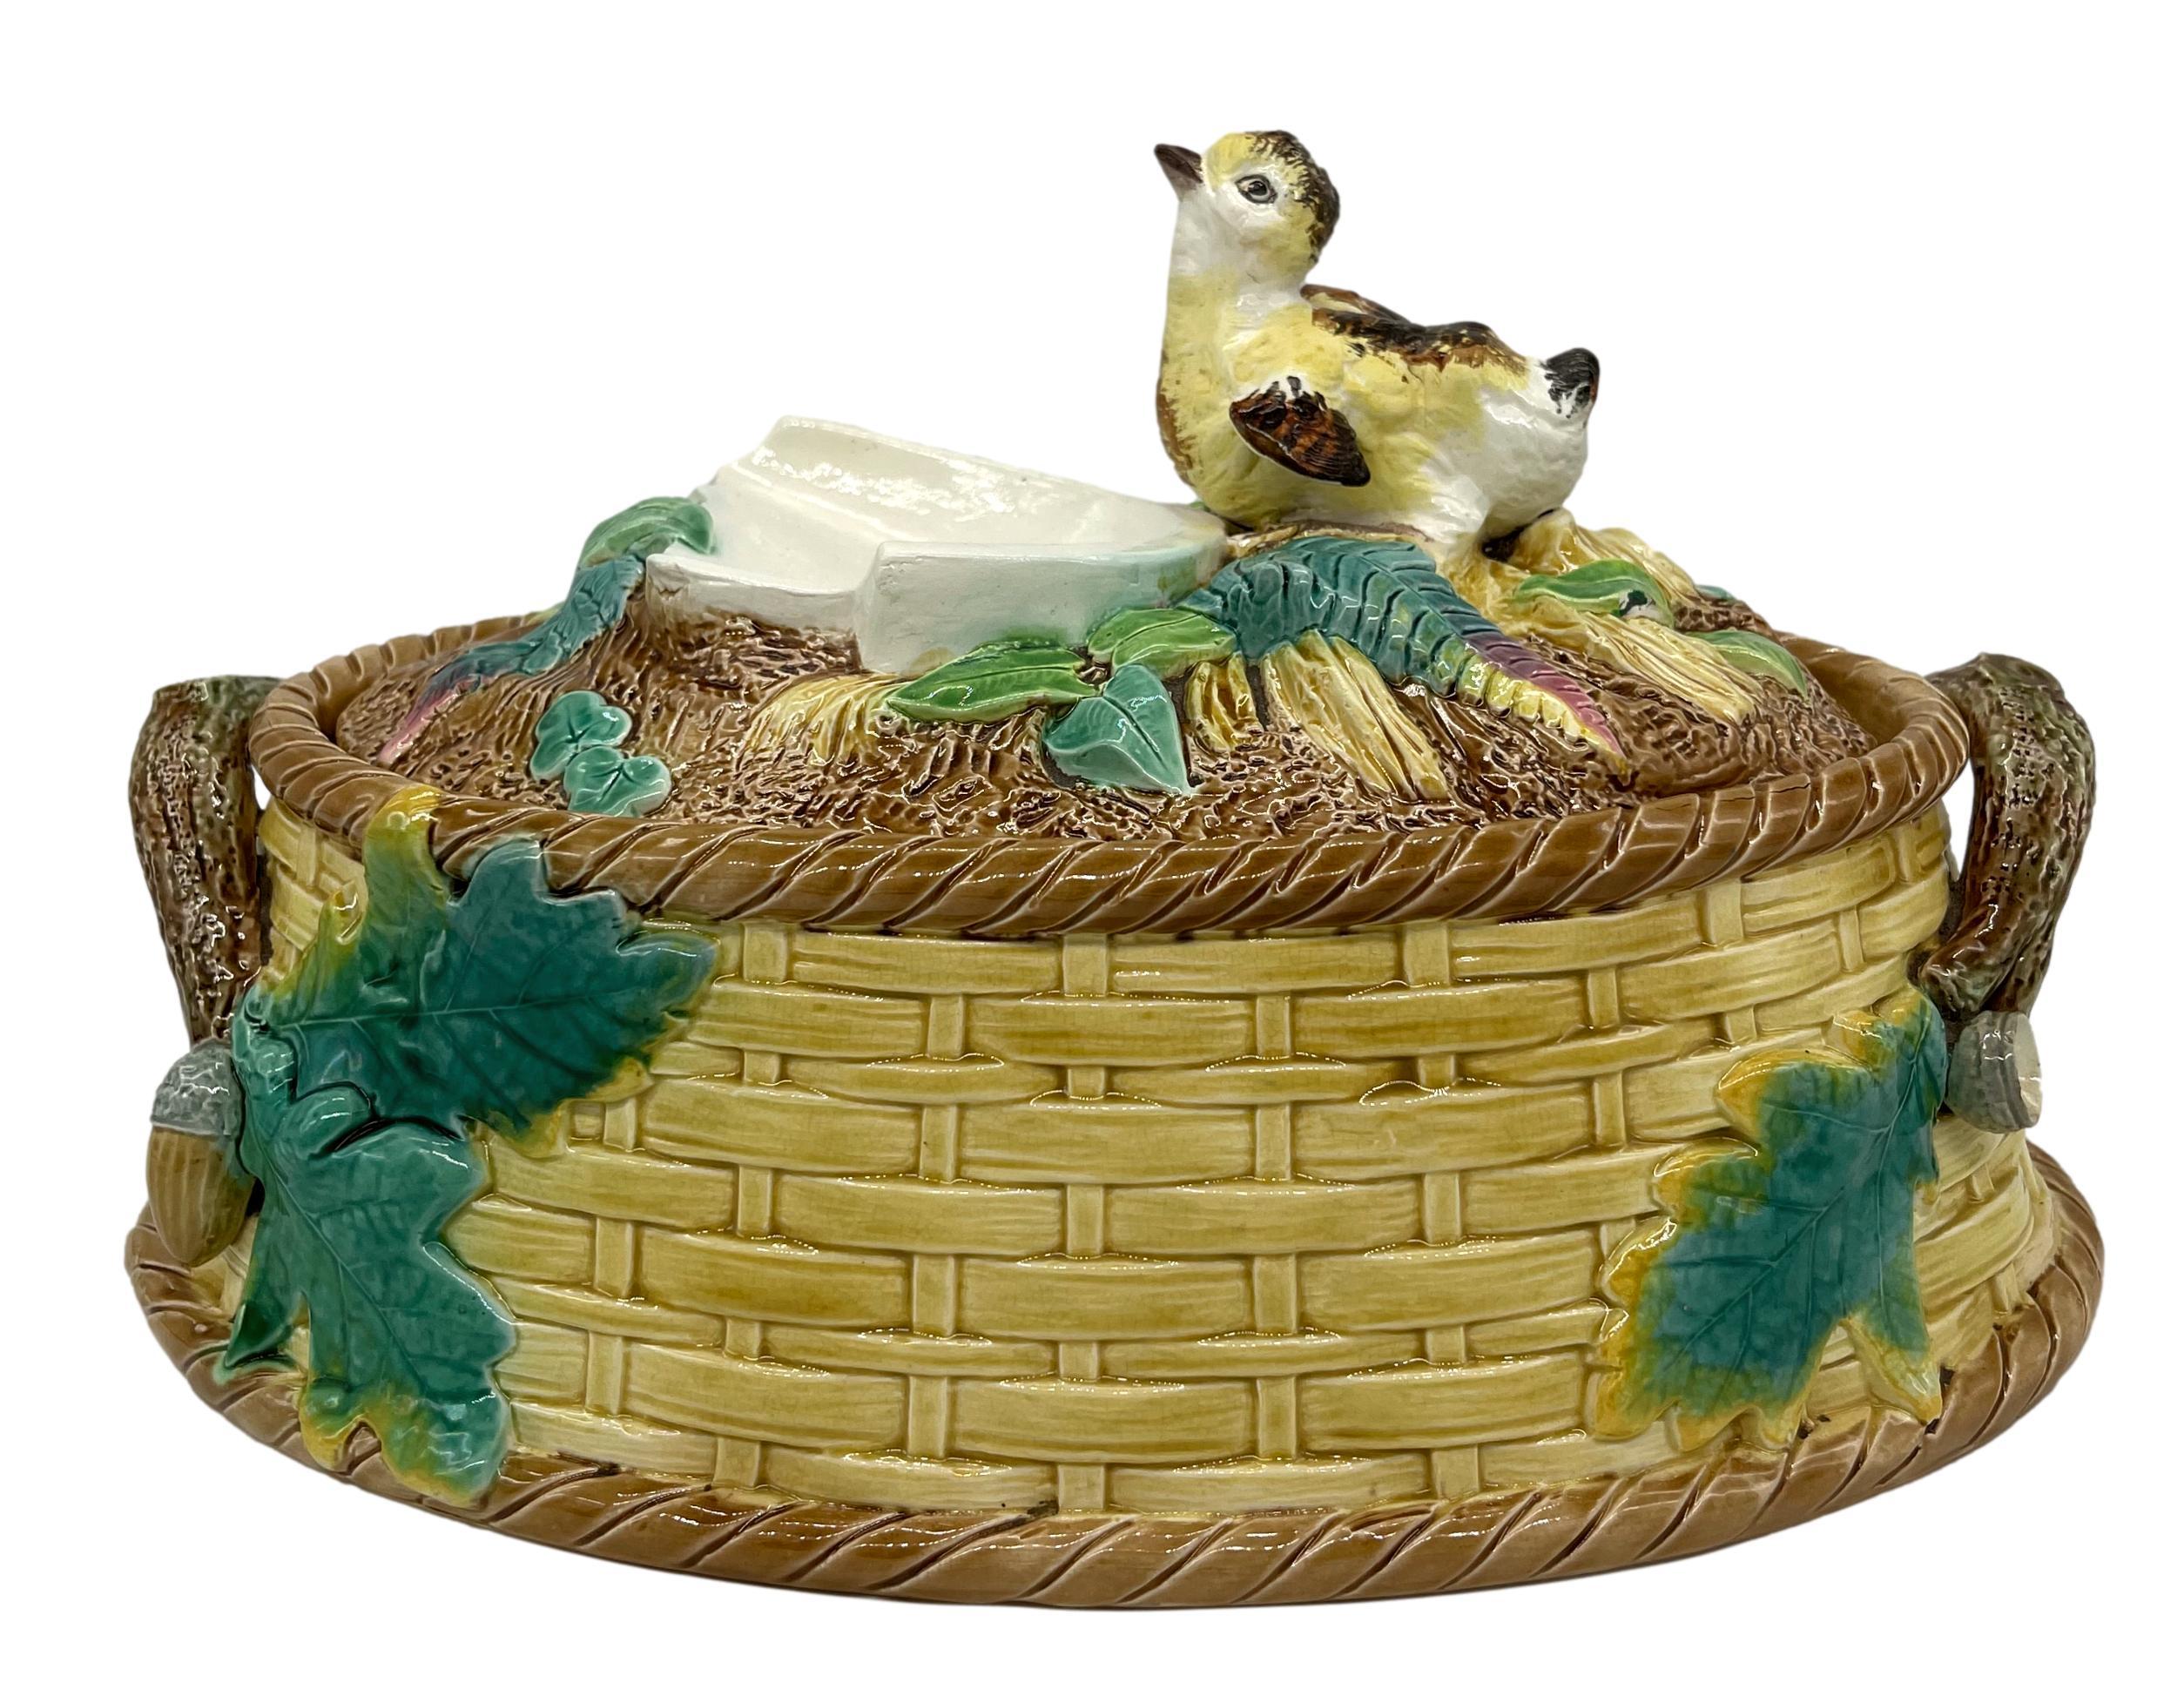 T.C. Brown-Westhead, Moore & Co. Majolica Game Pie Tureen, the base molded as a yellow-glazed woven basket with applied branch handles terminating with oak leaves and acorns, the mound-form cover with ferns and leaves, surmounted by a single grouse